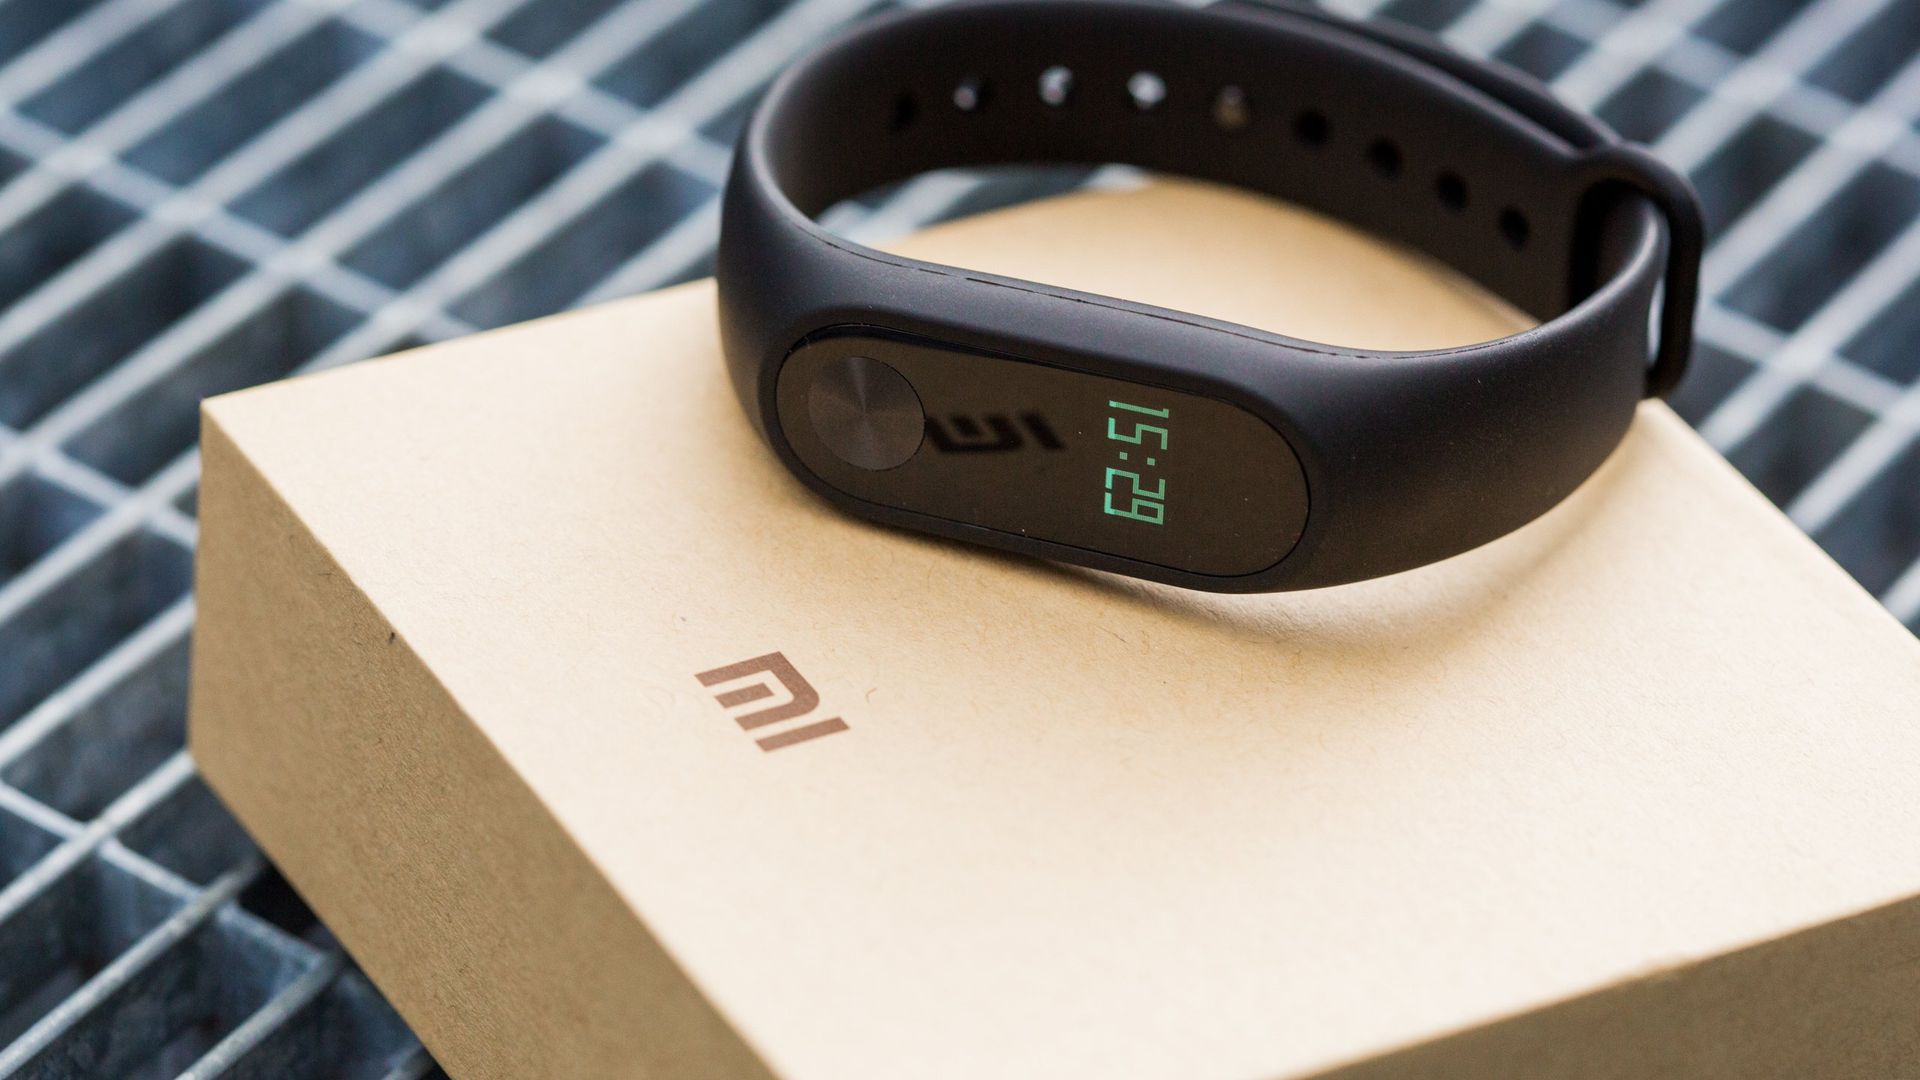 xiaomi-band-2-how-to-pair